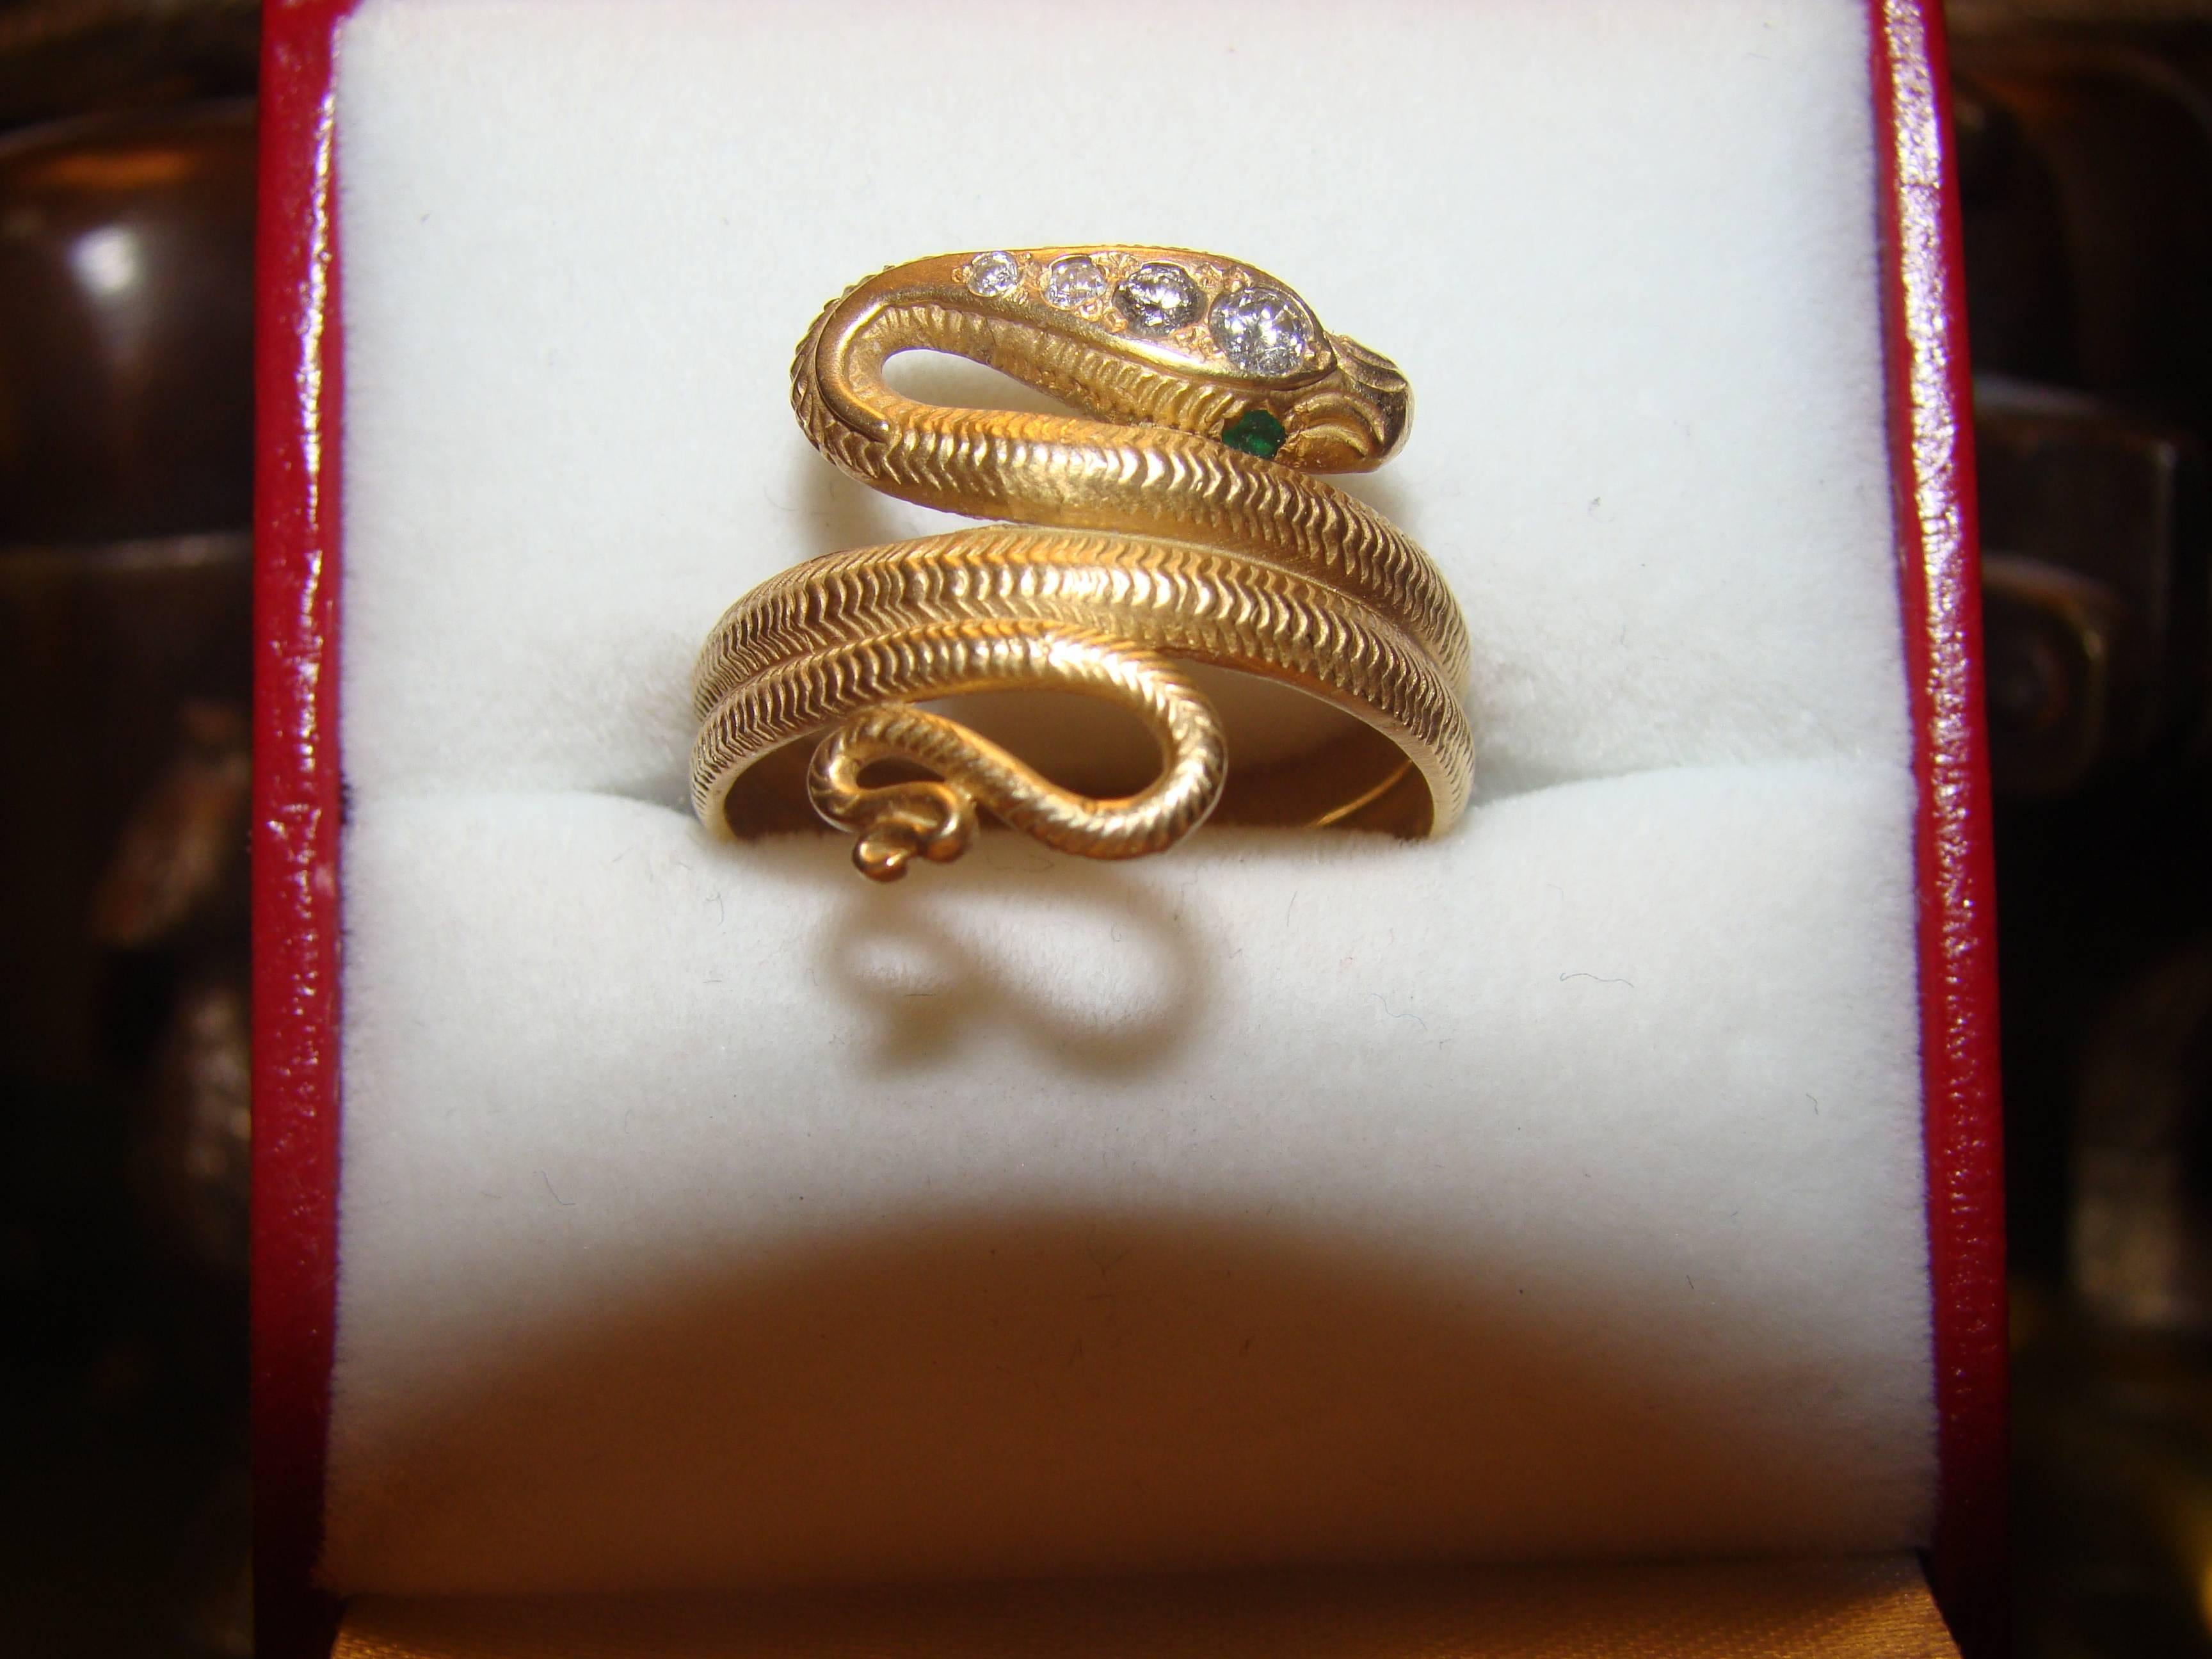 This beautiful antique Art Deco 18 karat yellow gold snake ring has beautiful texture, and it's head is mounted with four diamonds, and has two emerald eyes. The Vintage Diamonds are around VS 1 quality and very bright. Truly a unique ring in